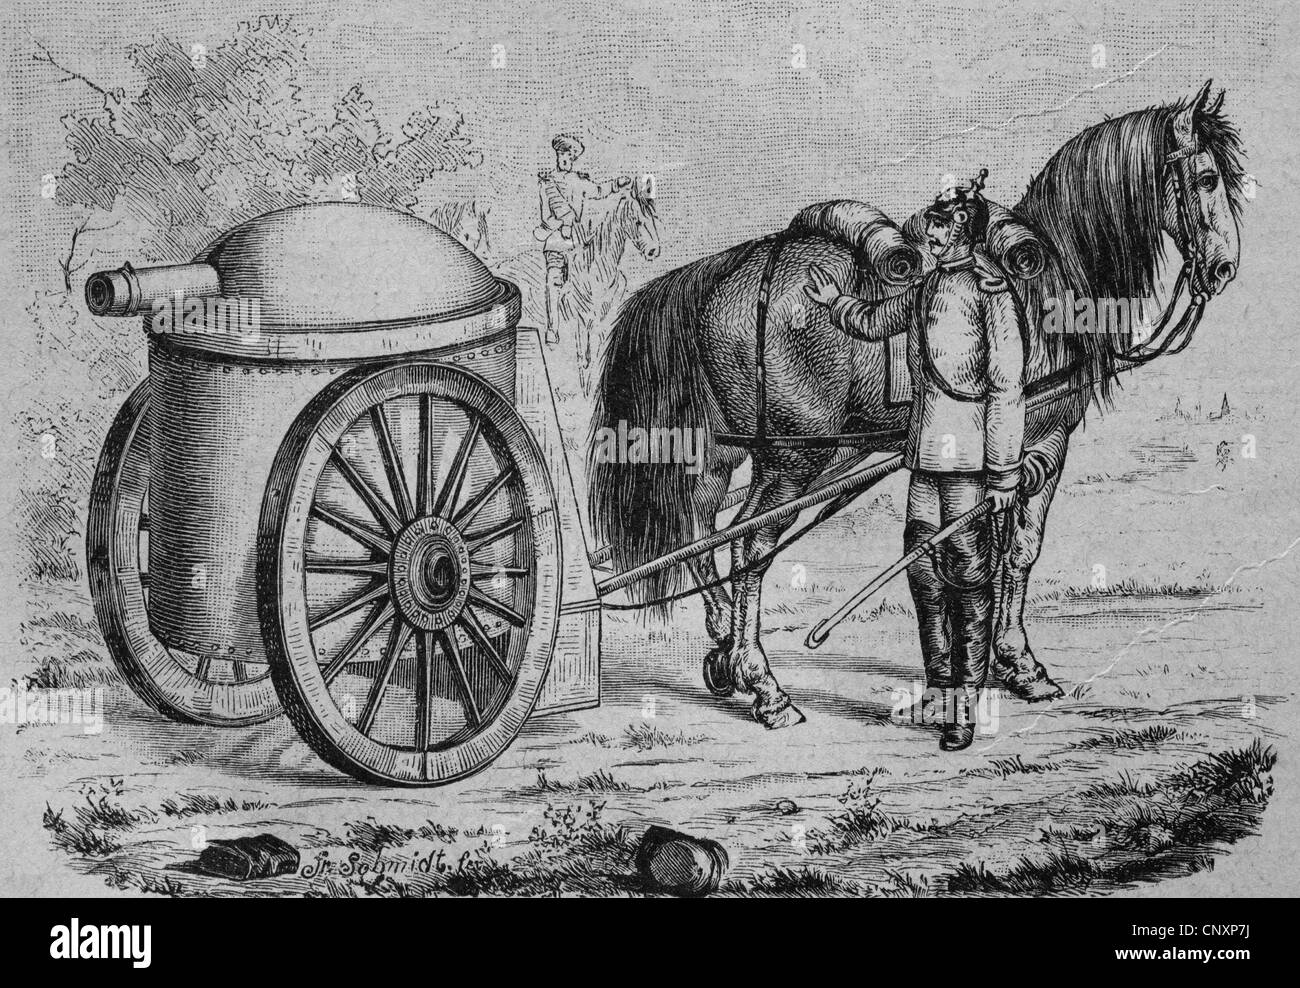 Wheeled armored turret of Hermann August Jacques Gruson, 1821 - 1895, inventor, scientist and industrialist, historic engraving, Stock Photo